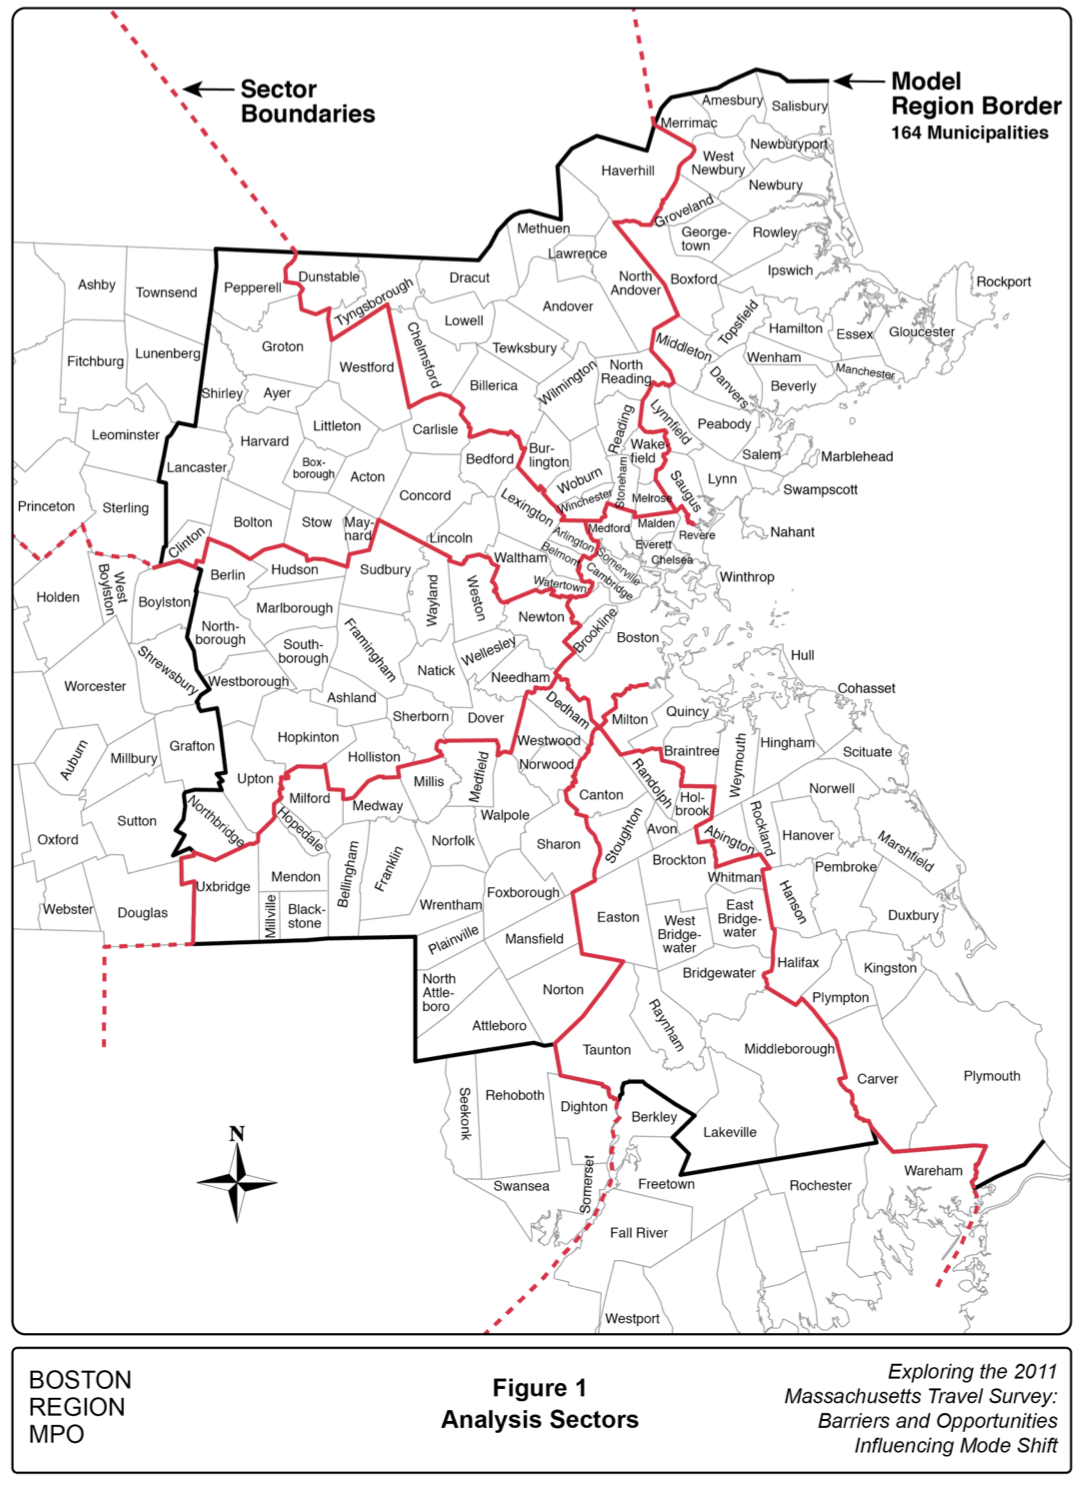 Figure 1 is a map of eastern Massachusetts showing the 164 municipalities that are in the MPO’s model area. The model area is delineated to show eight study sectors.